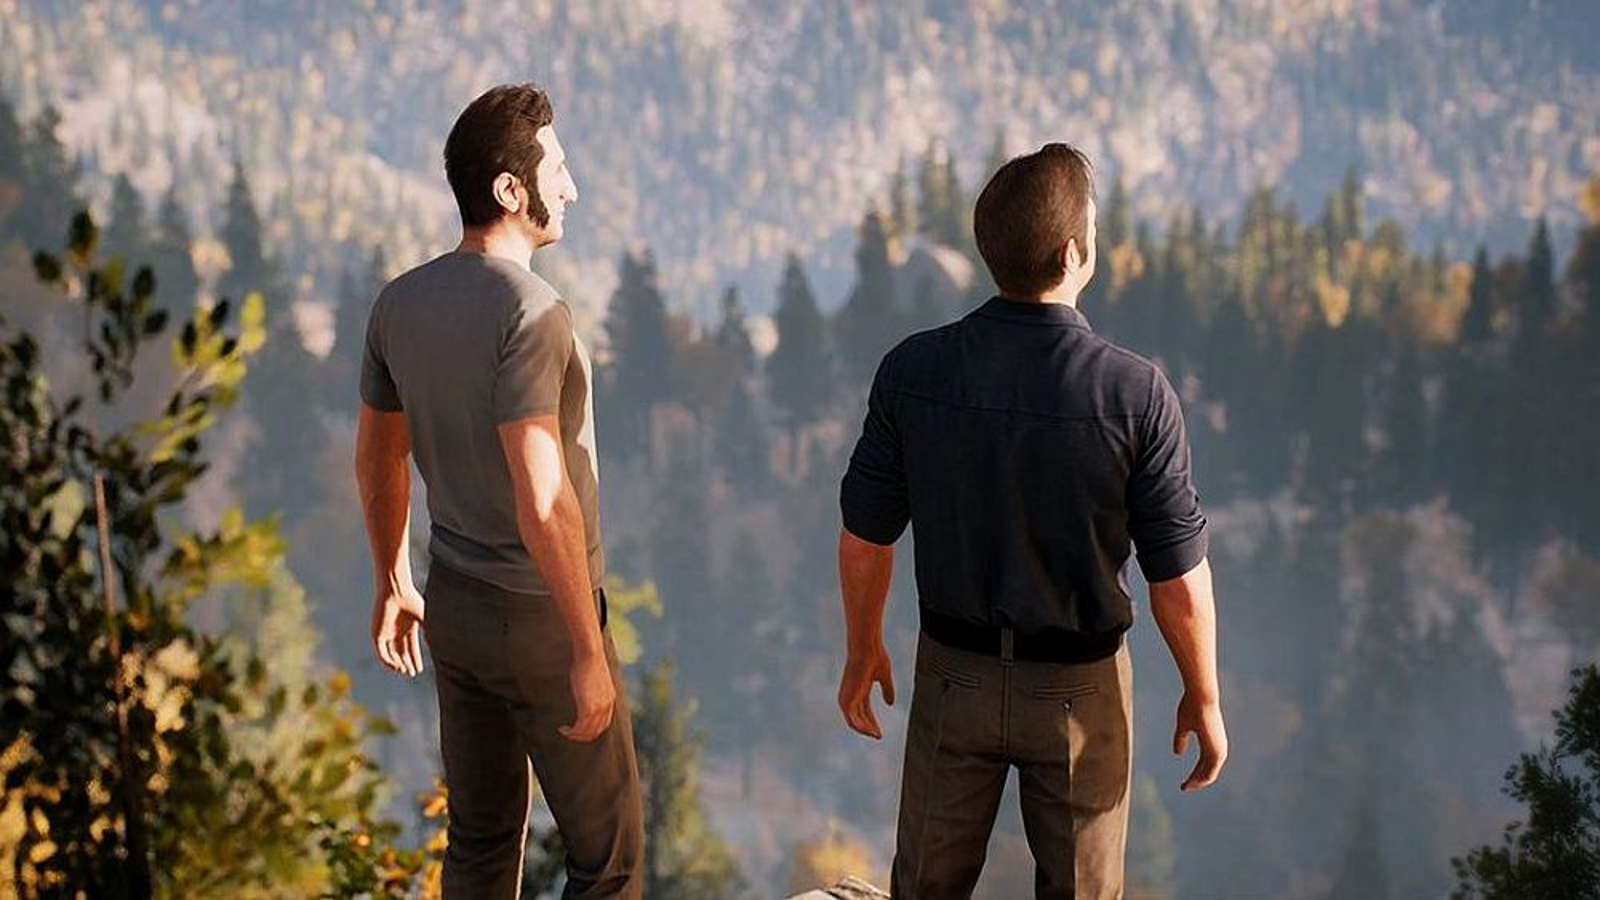 A way out джойстик. A way out Винсент. Way out игра. А Wаy оut игра. A way out (2018).